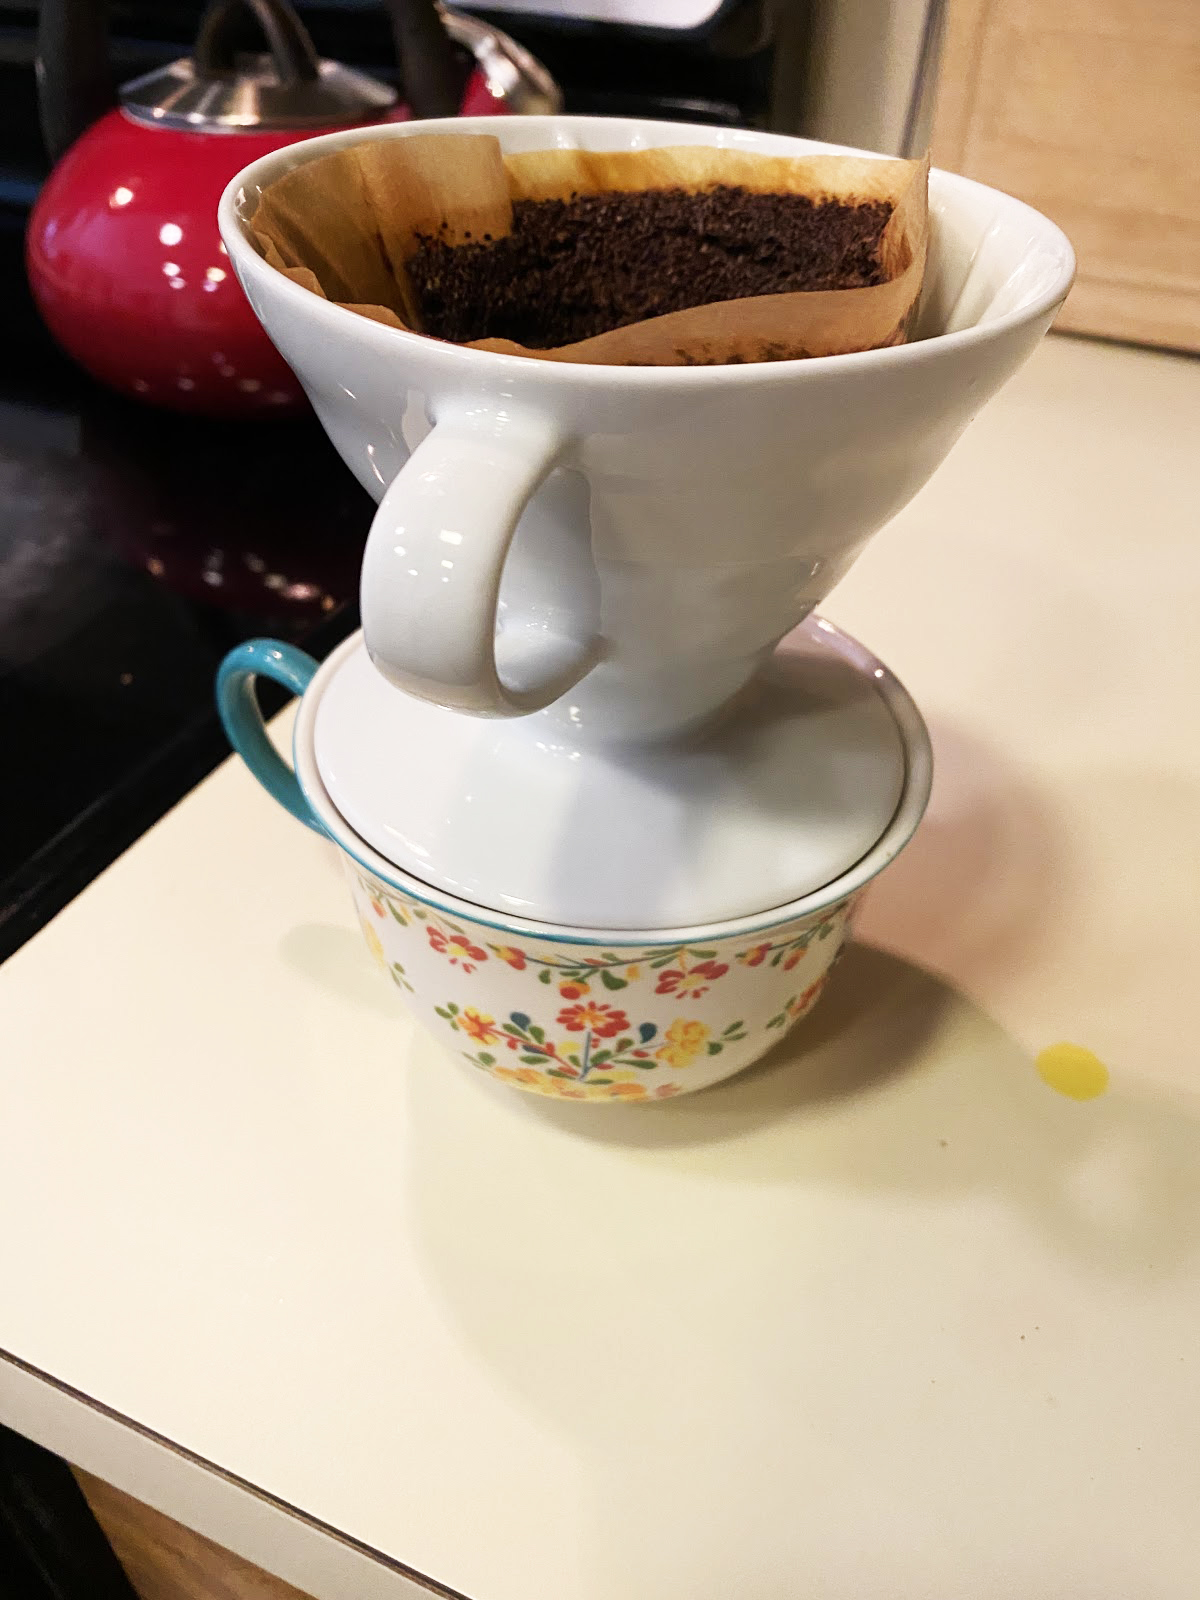 A photo of a single-cup pour over coffee brewer sitting on top of a floral print coffee cup on a counter with a red kettle in the background.